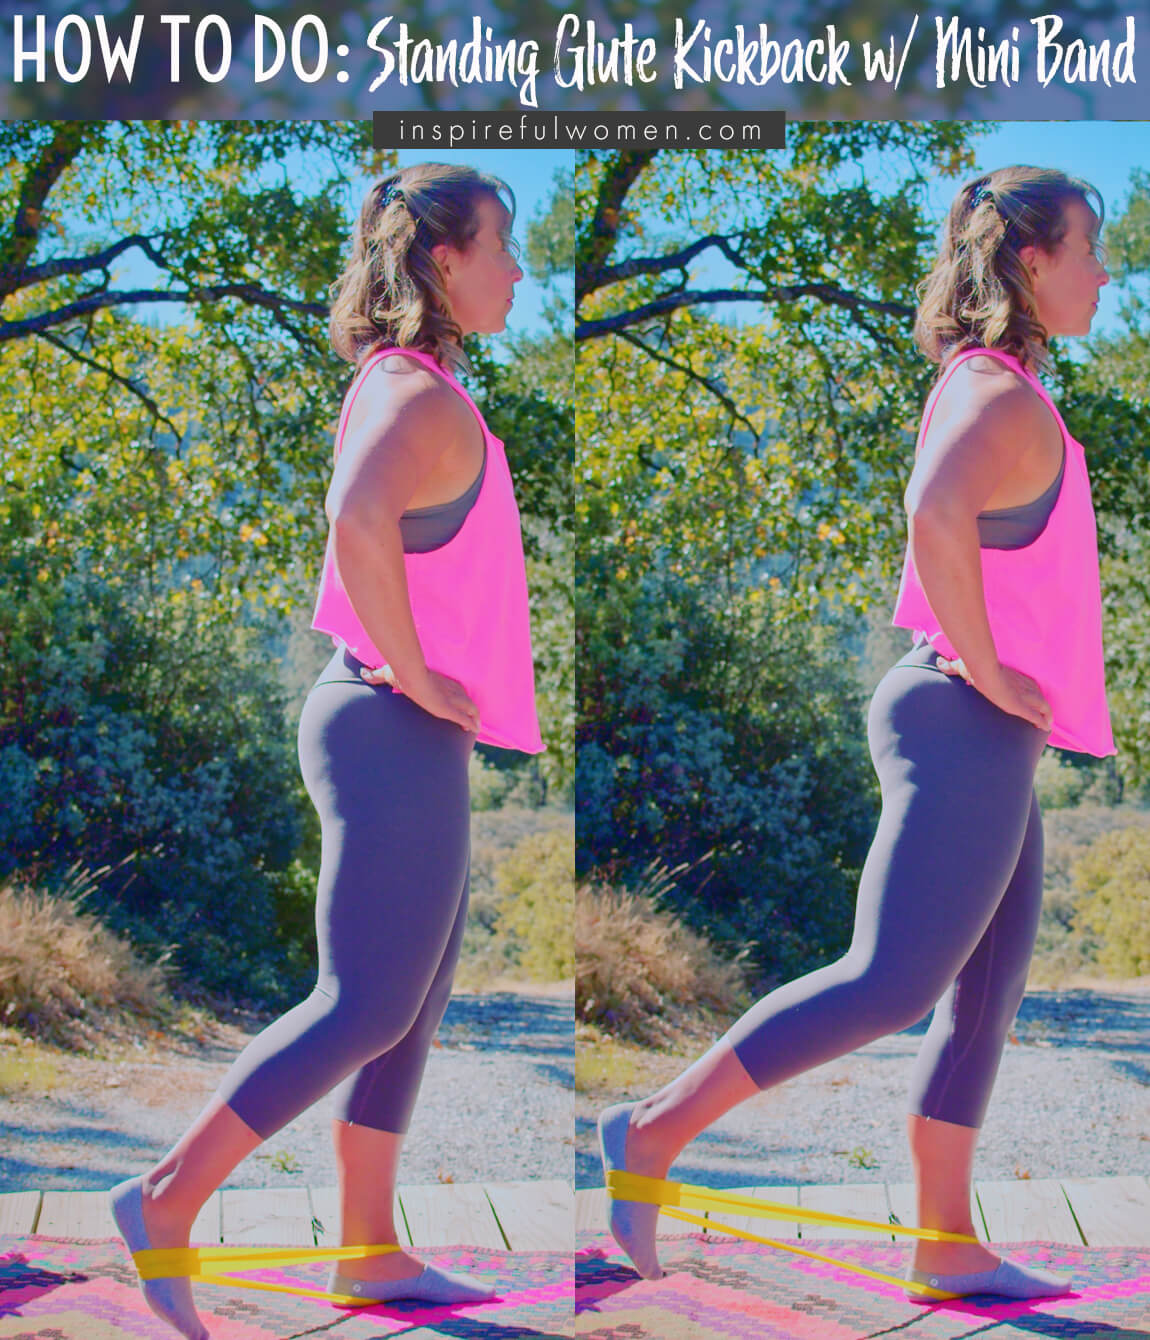 how-to-mini-band-standing-glute-kickback-at-home-glute-activation-exercise-proper-form